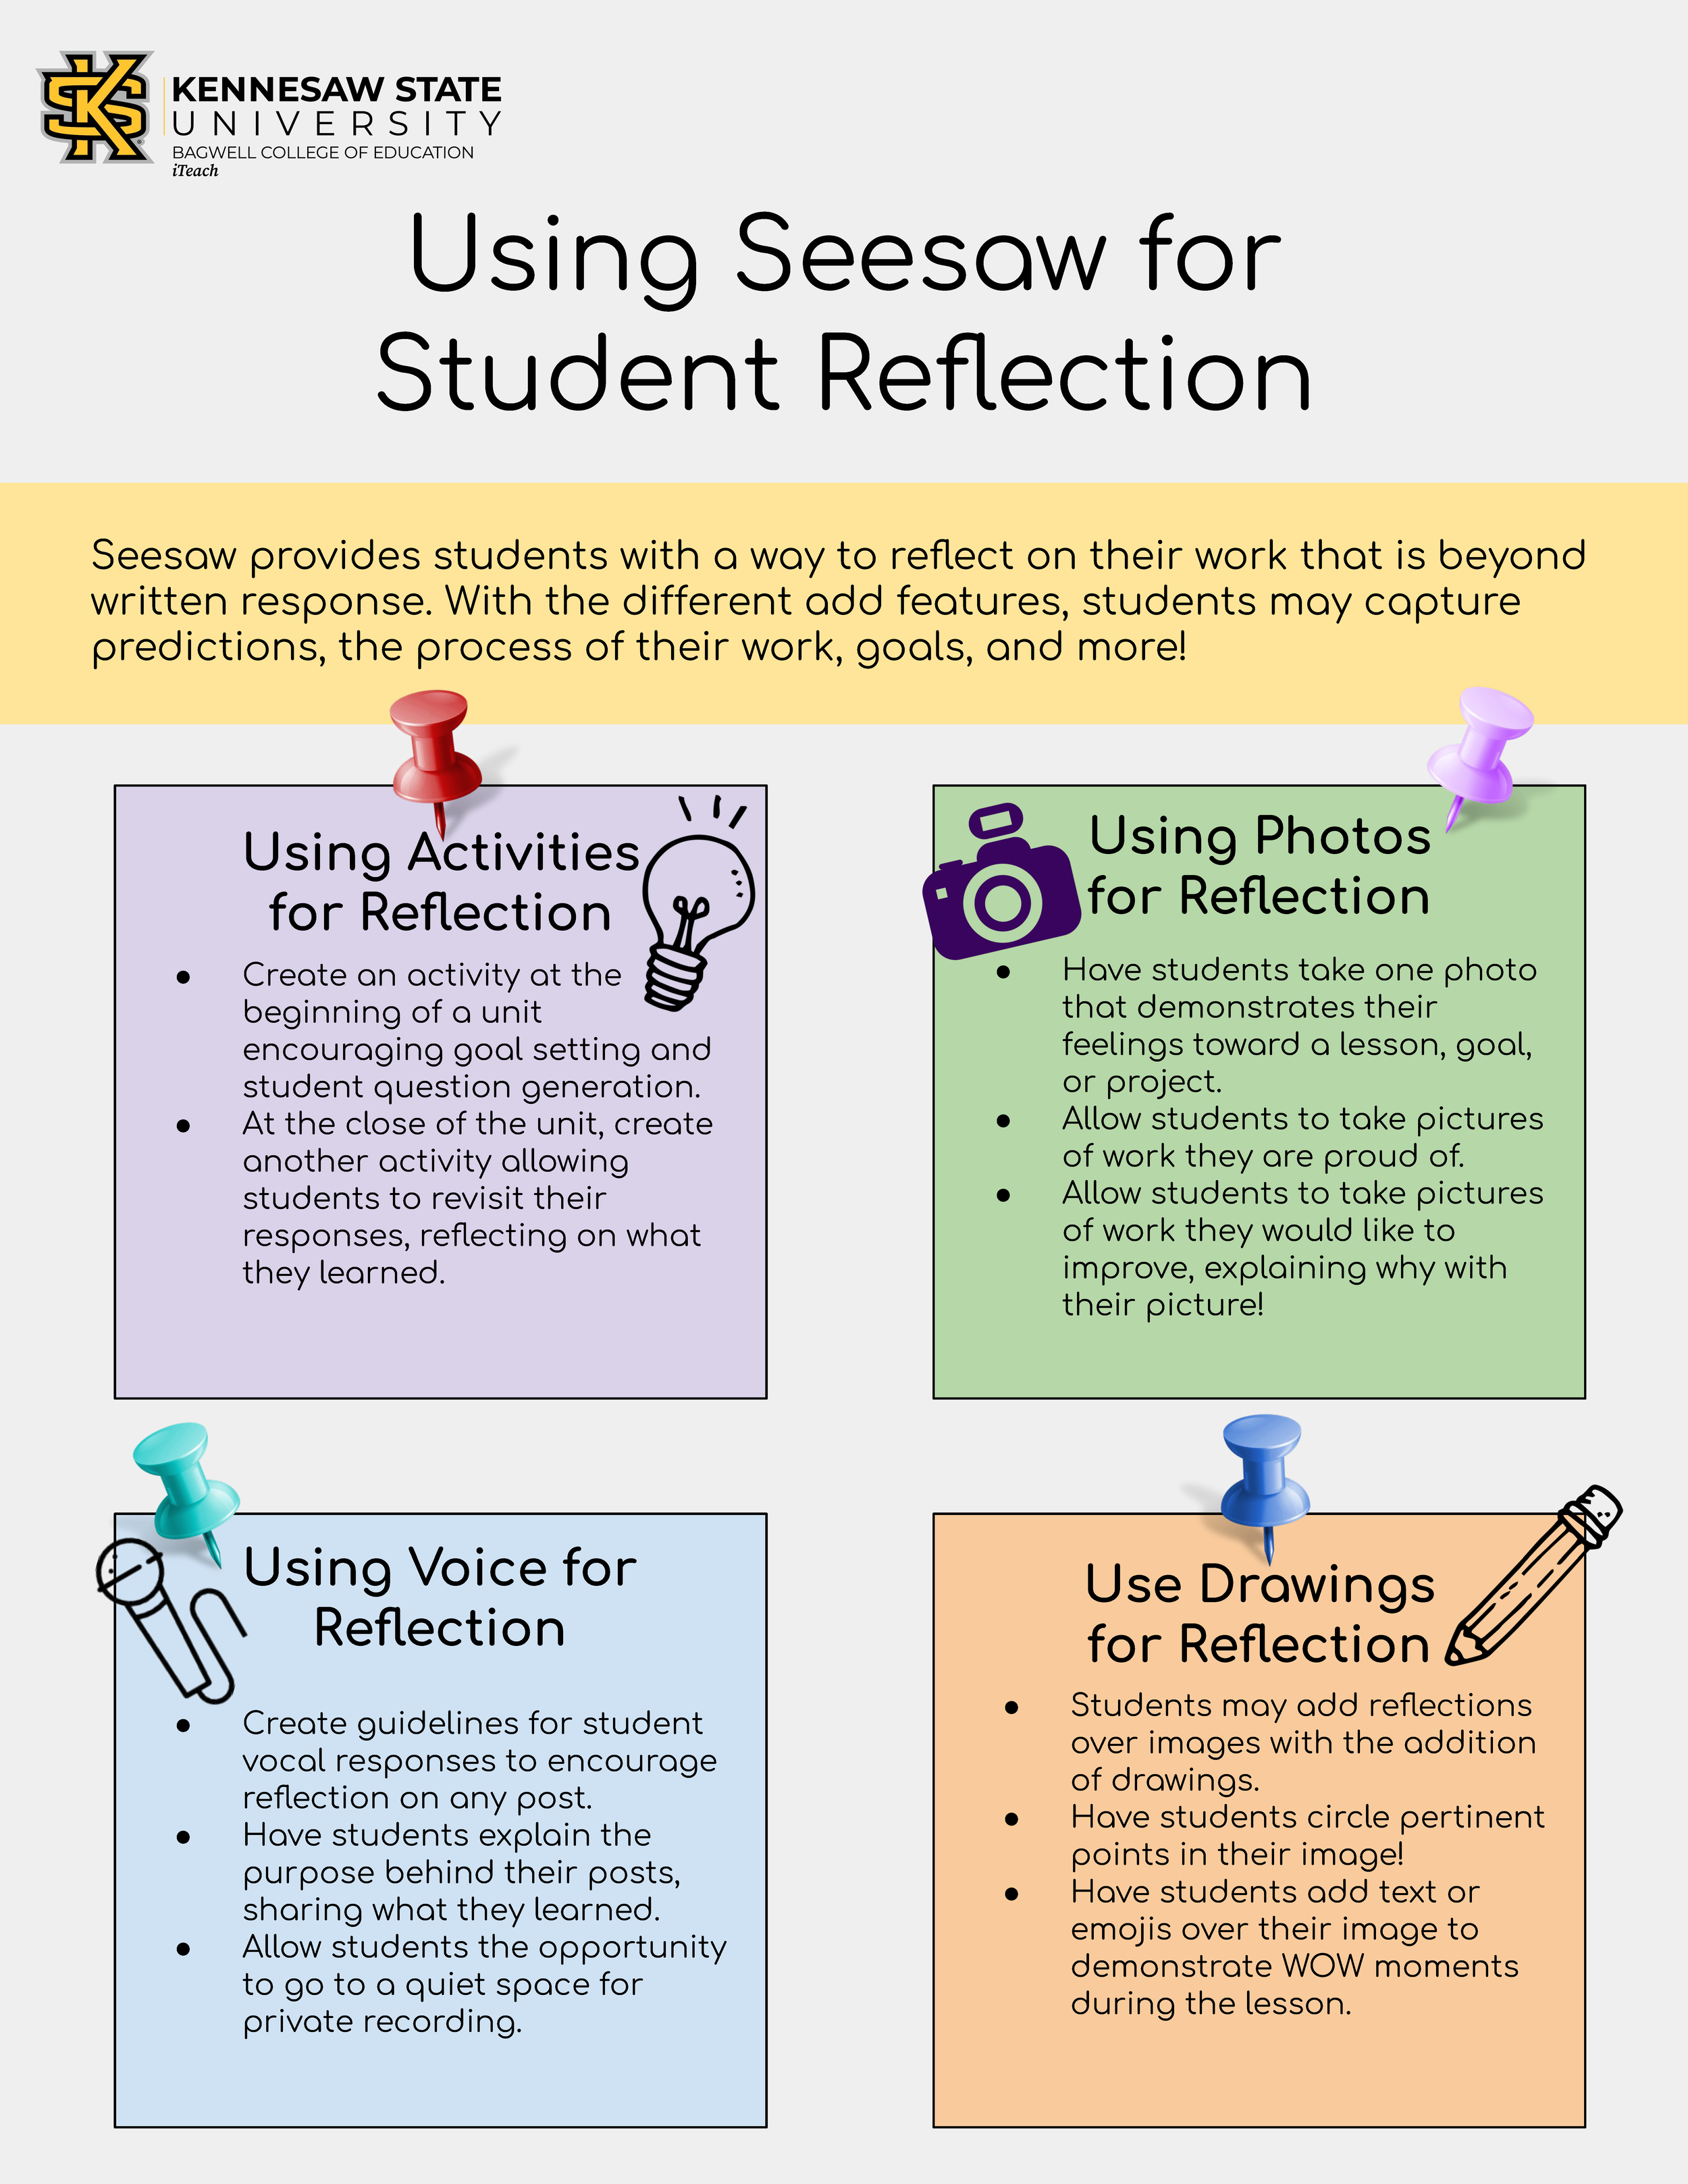 Using Seesaw for Student Reflection.png